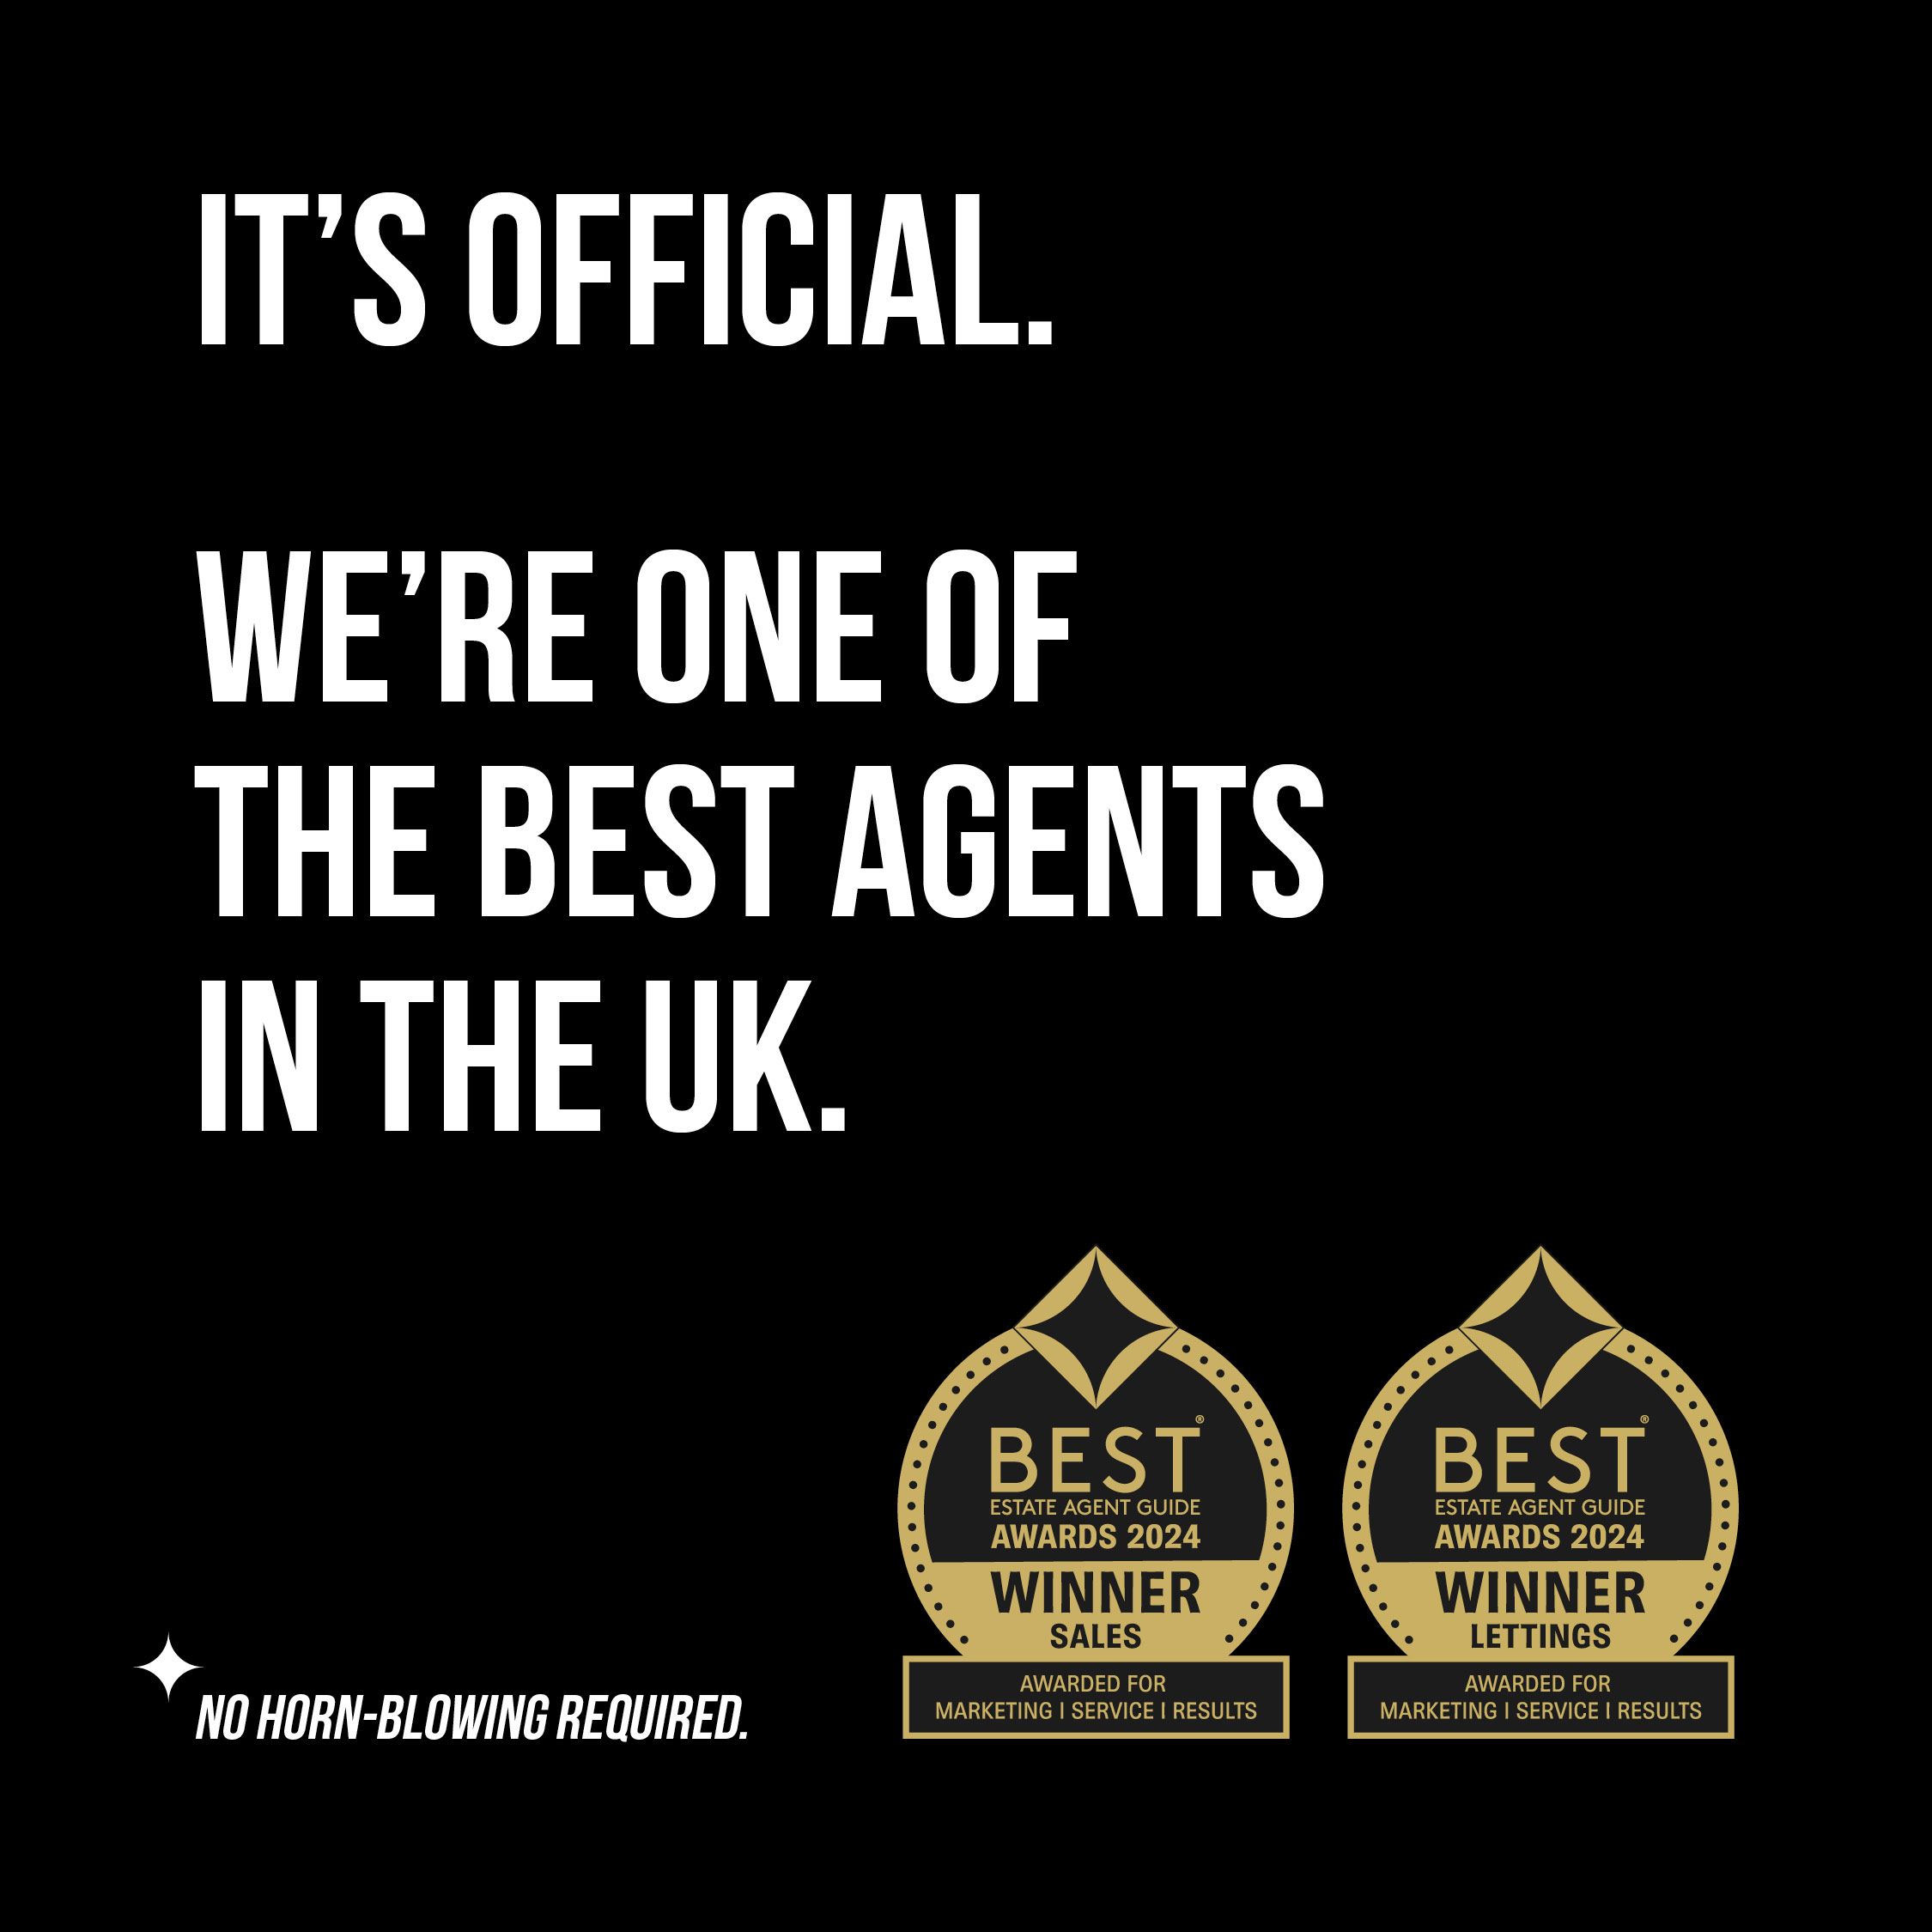 Inspire is listed in the Best Estate Agent Guide 2024